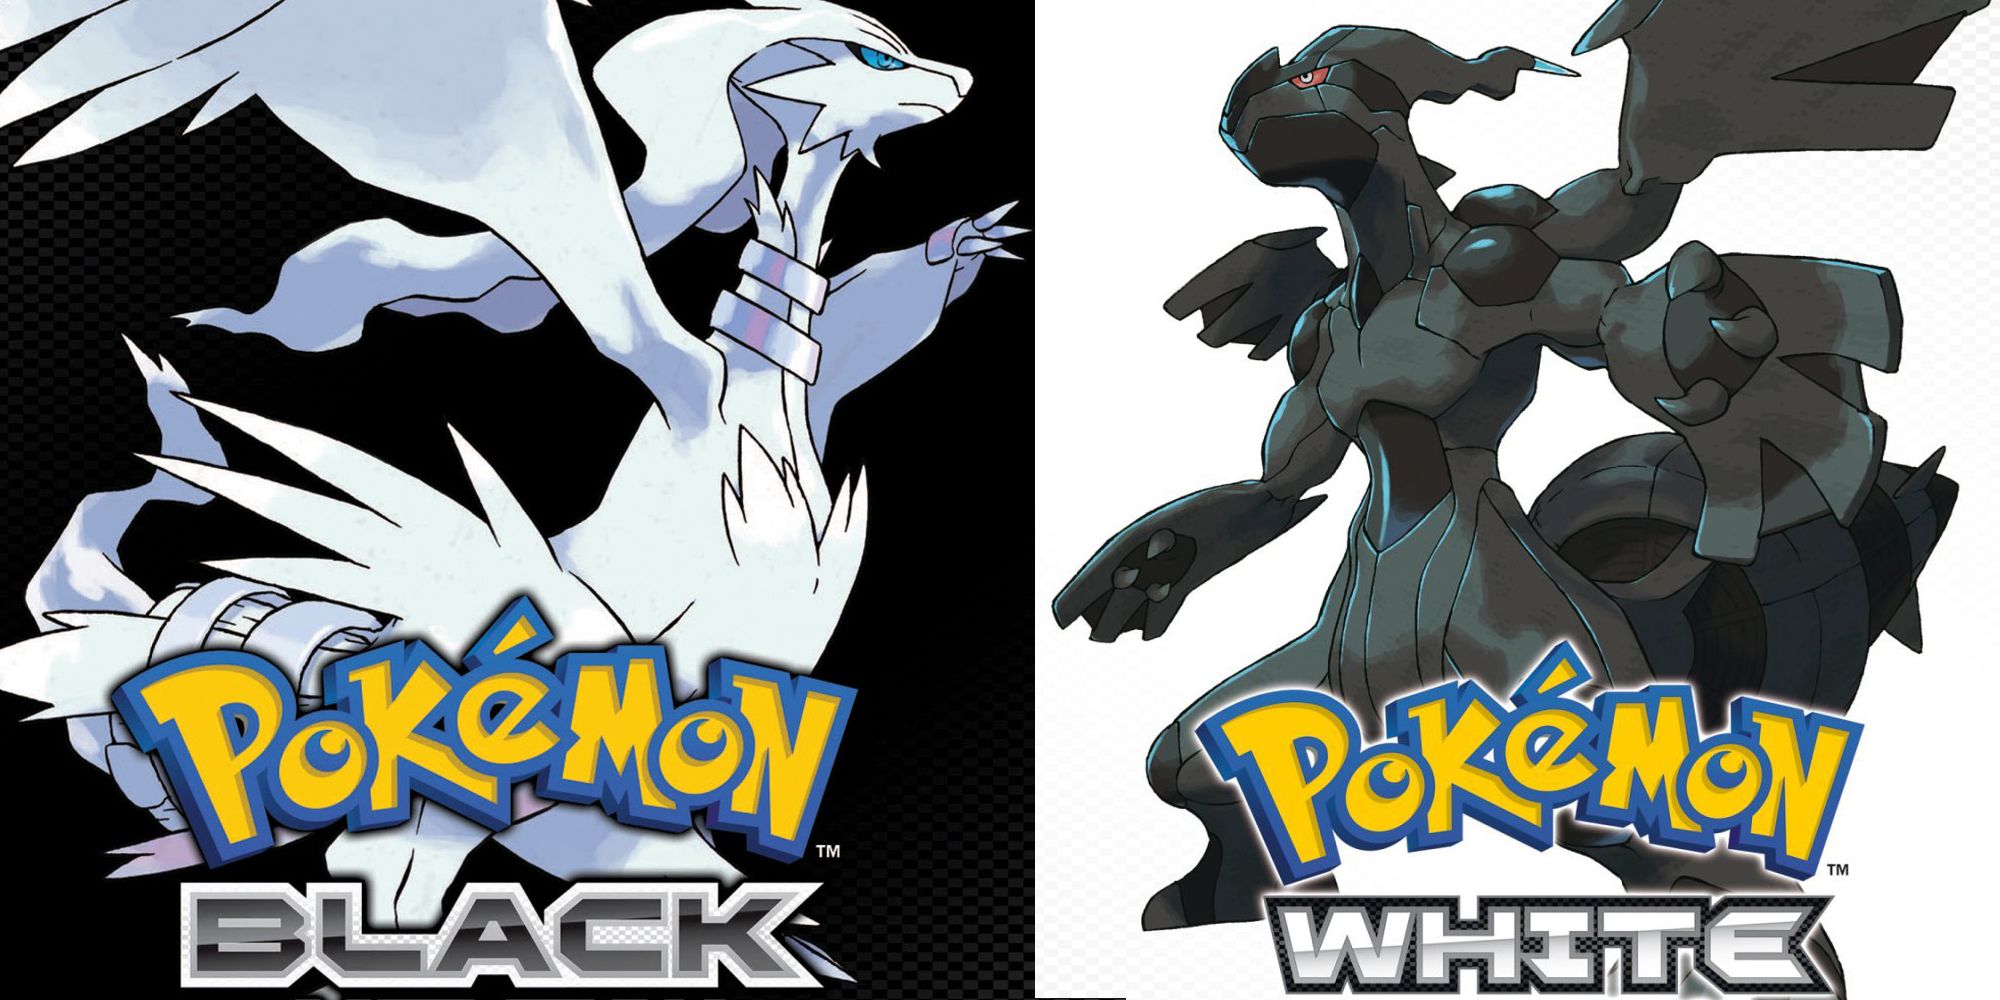 Reshiram and Zekrom on the covers for Pokémon Black and White, respectively.